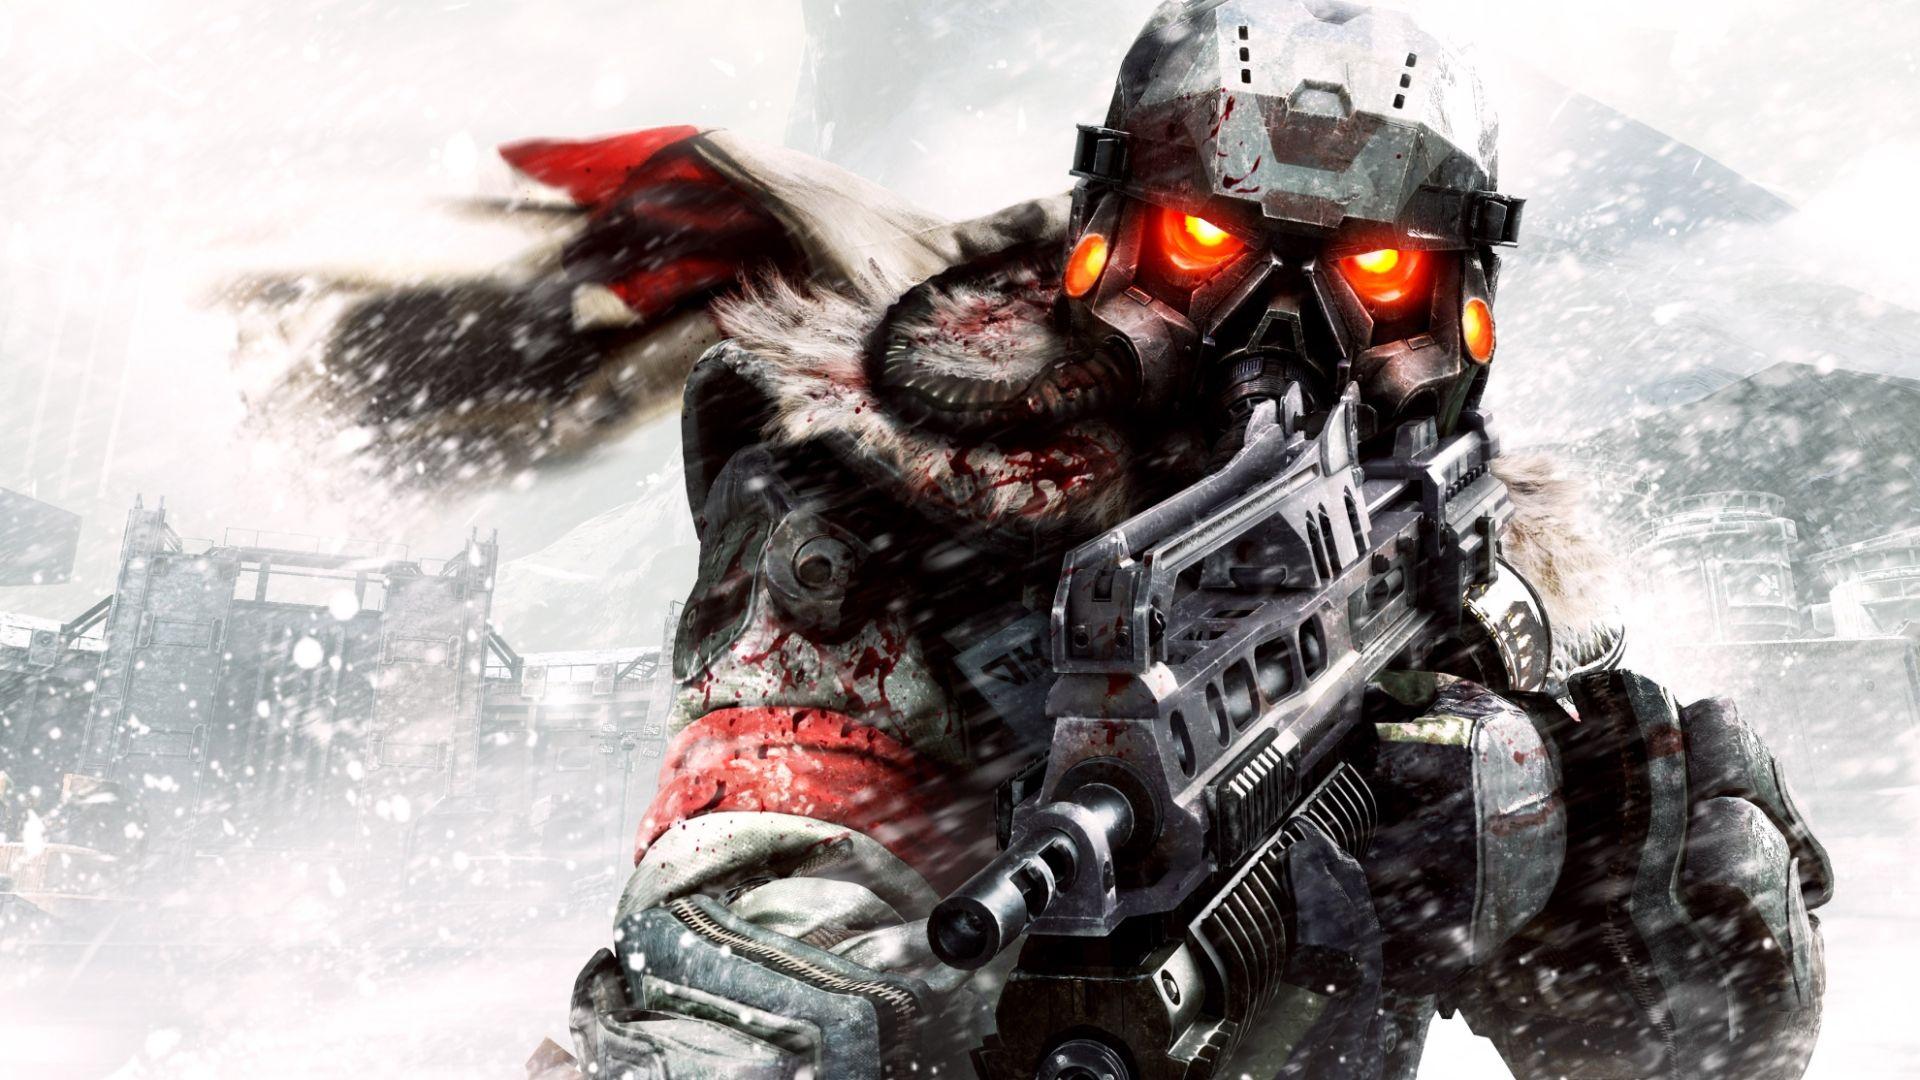 Killzone 3 Full HD Wallpaper and Background Imagex1080